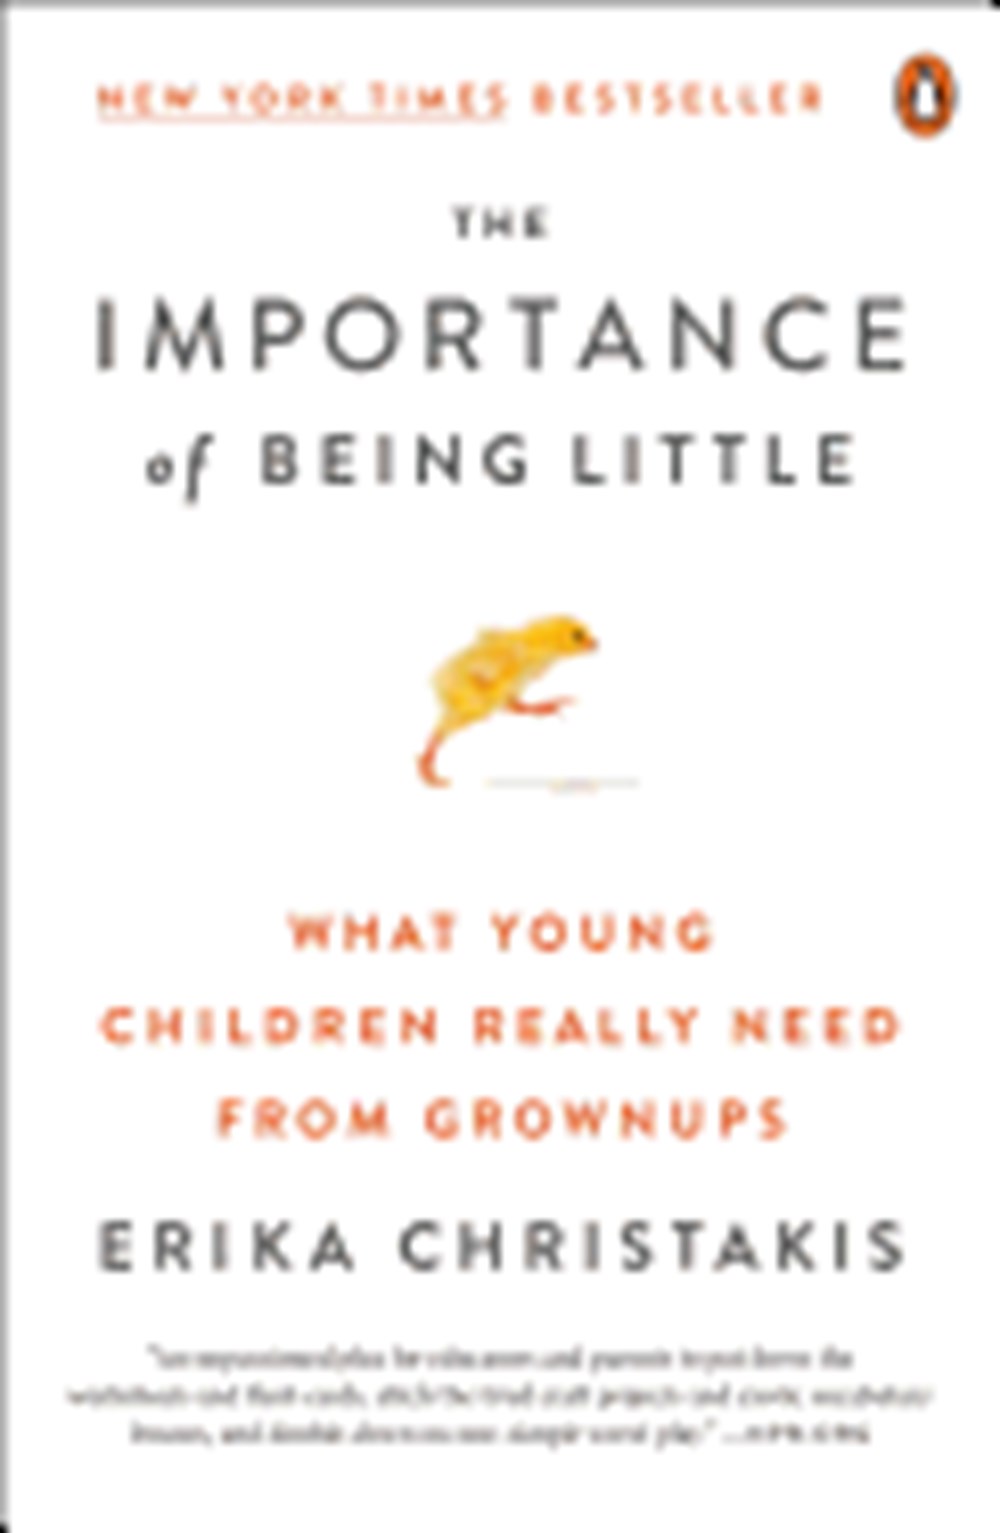 Importance of Being Little: What Young Children Really Need from Grownups